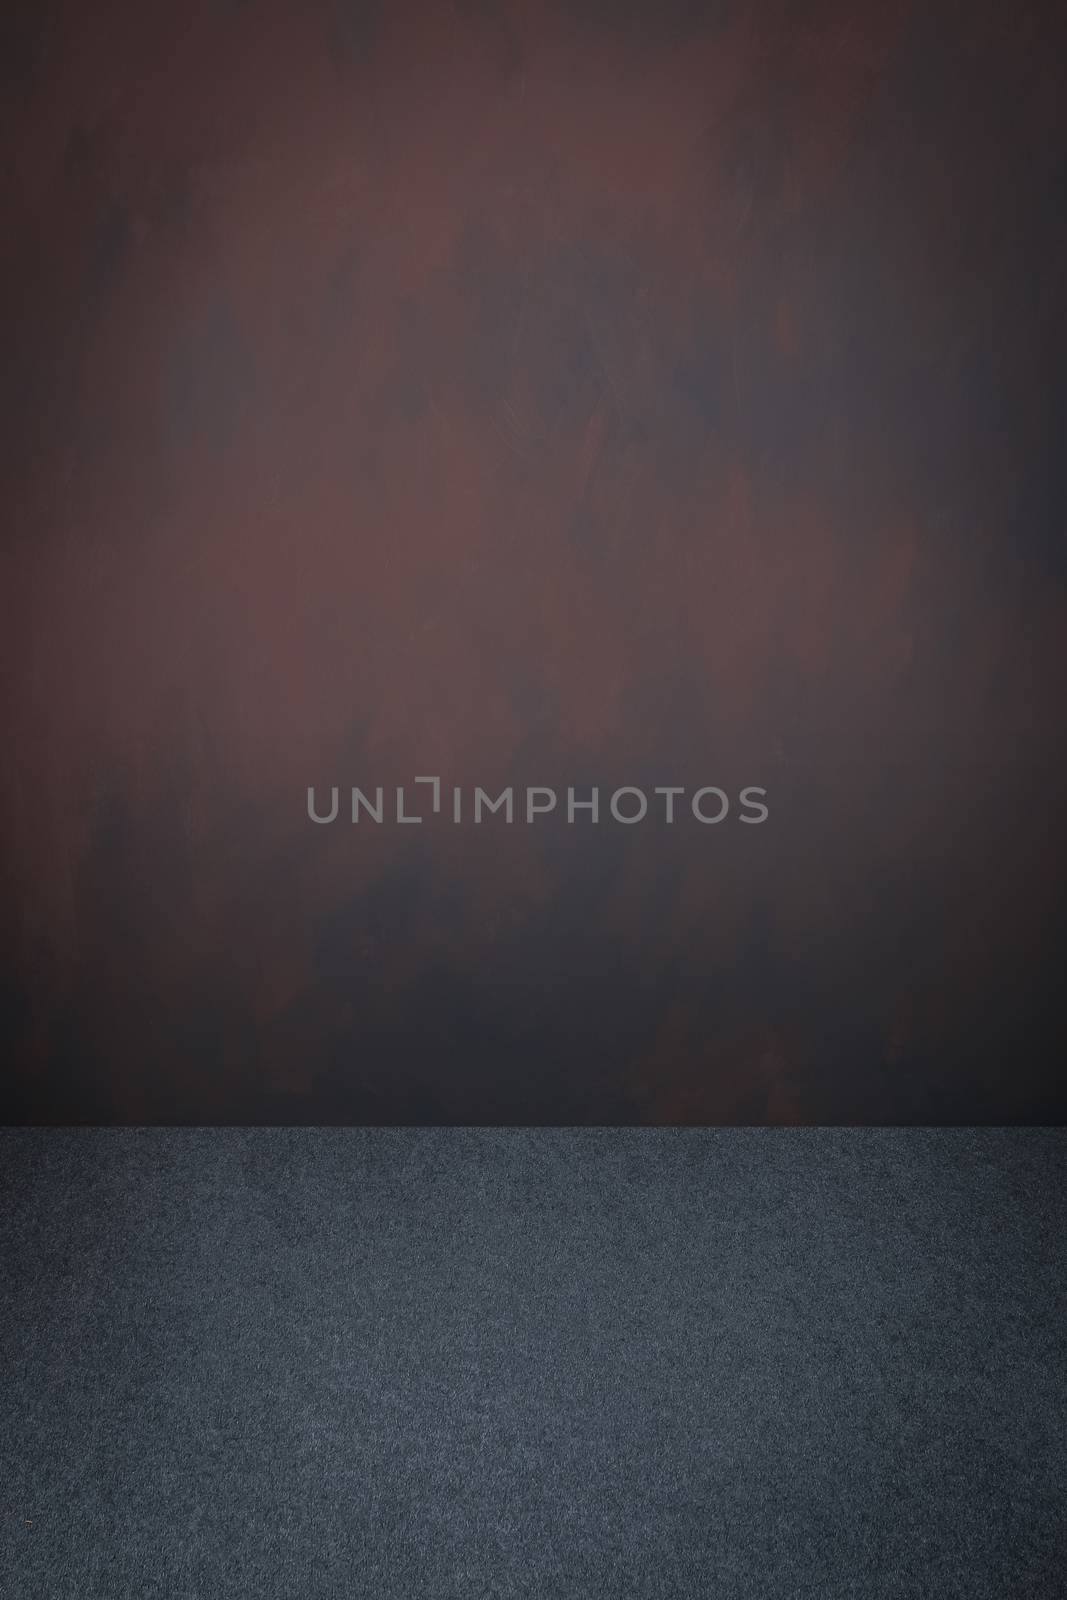 Grey carpet and dark brown grey grungy painted wall with vignette, use for background